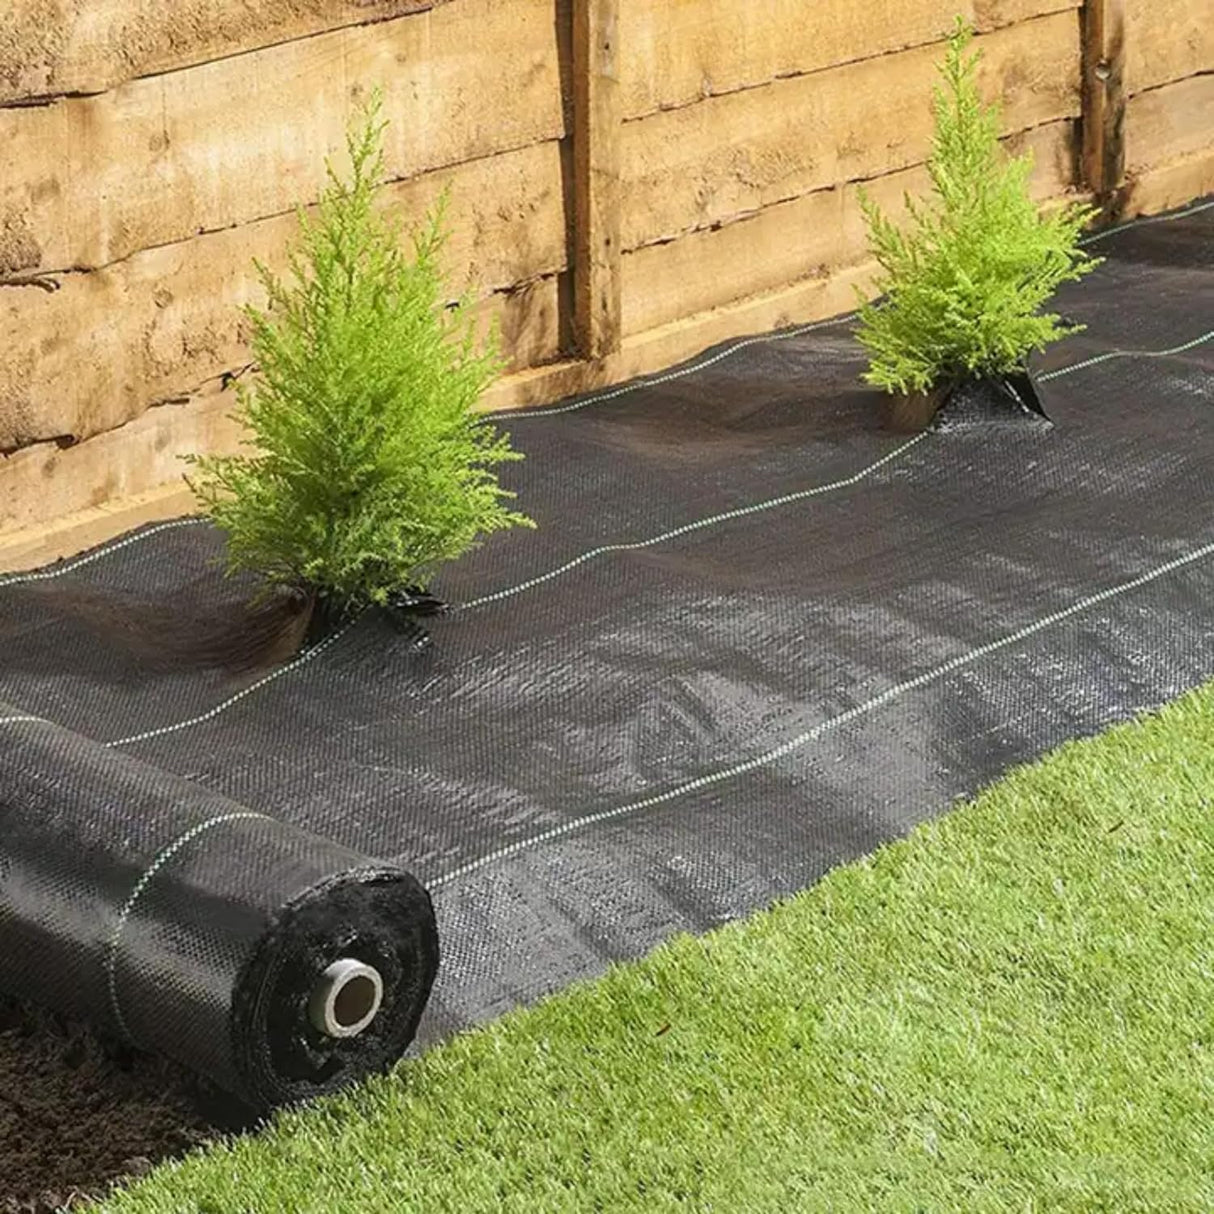 Singhal Premium Garden Weed Control Barrier Sheet Mat 2 x 100 Mtr, Landscape Fabric 90 GSM Heavy Duty Weed Block Gardening Mat for Gardens, Agriculture, Outdoor Projects (Black) (2x100 Meter)